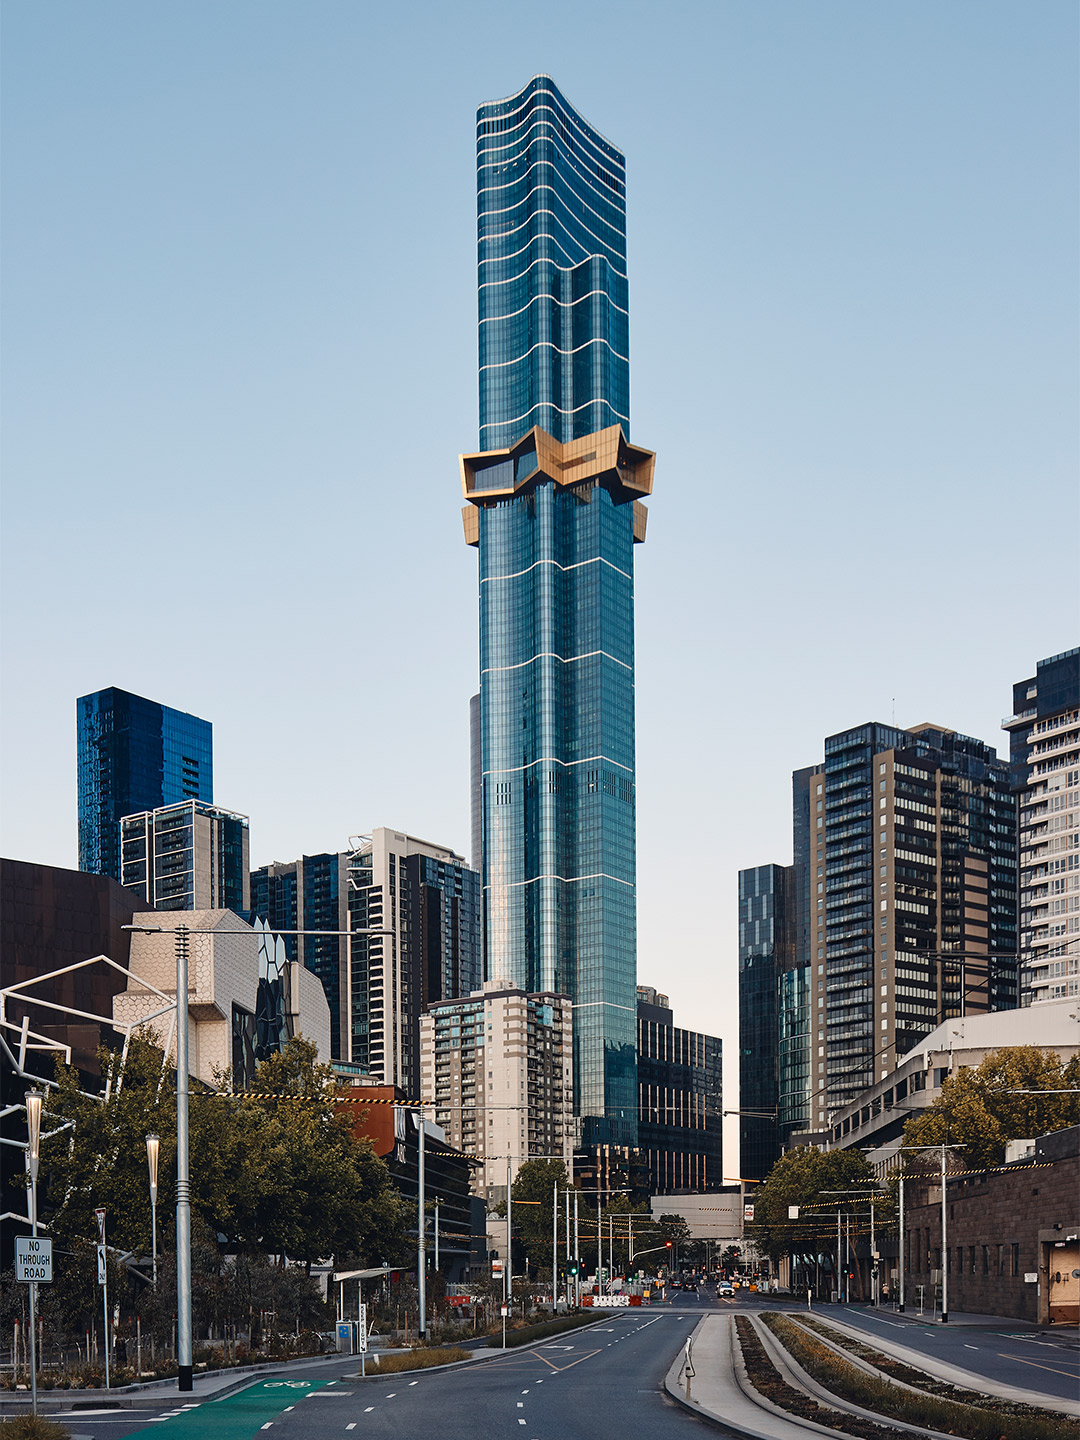 Australia 108, the southern hemisphere's tallest residential tower, located in Melbourne, Australia.